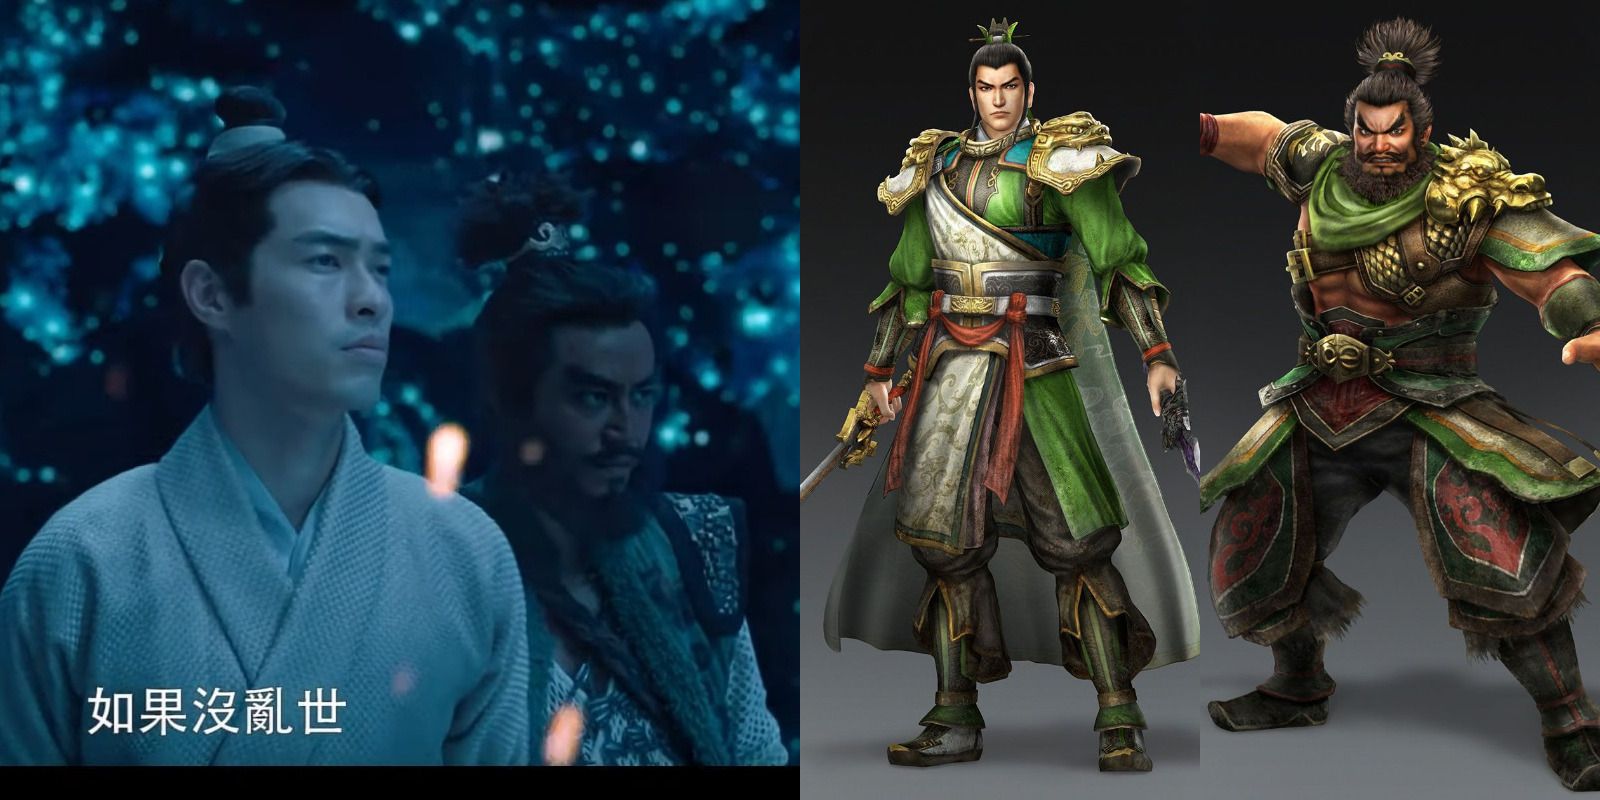 Live Action Liu Bei and Zhang Fei and Videogame Liu Bei and Zhang Fei